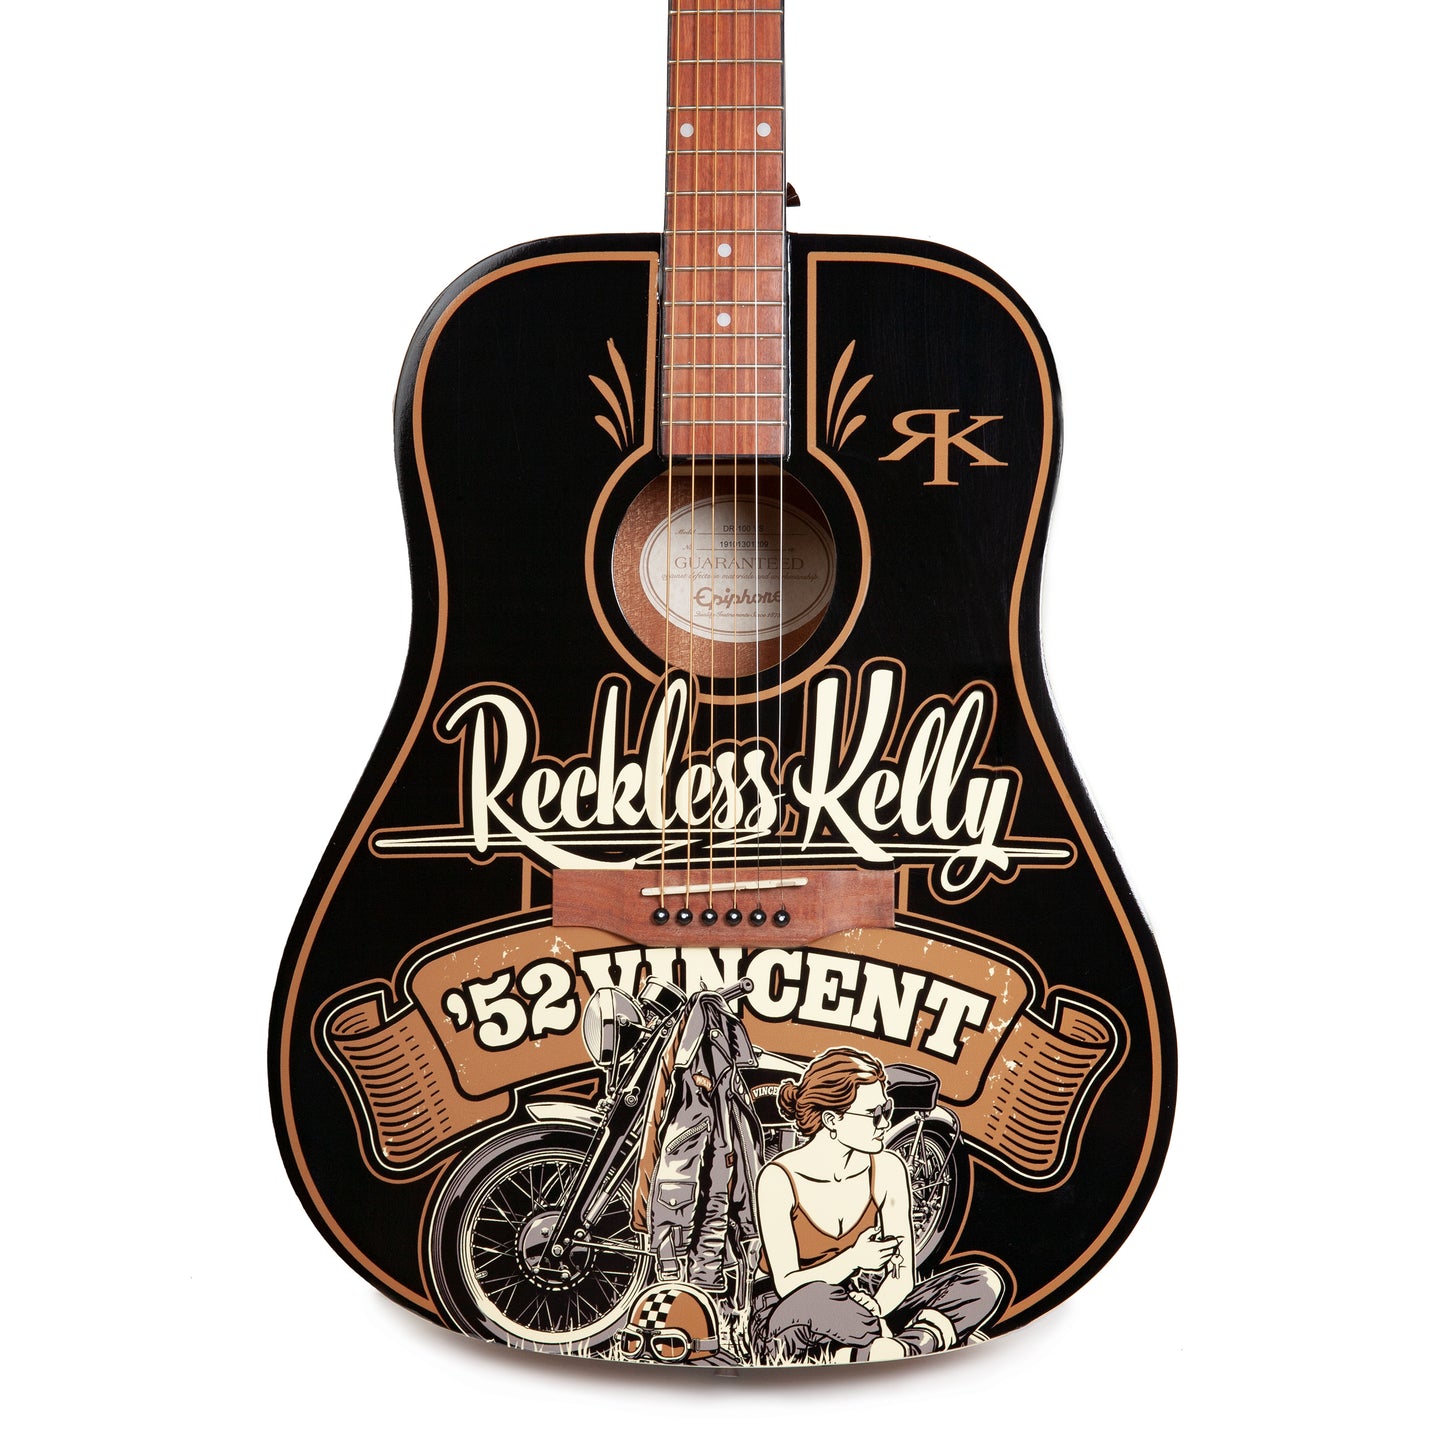 52 Vincent Guitar  - AUTOGRAPHED BY RECKLESS KELLY